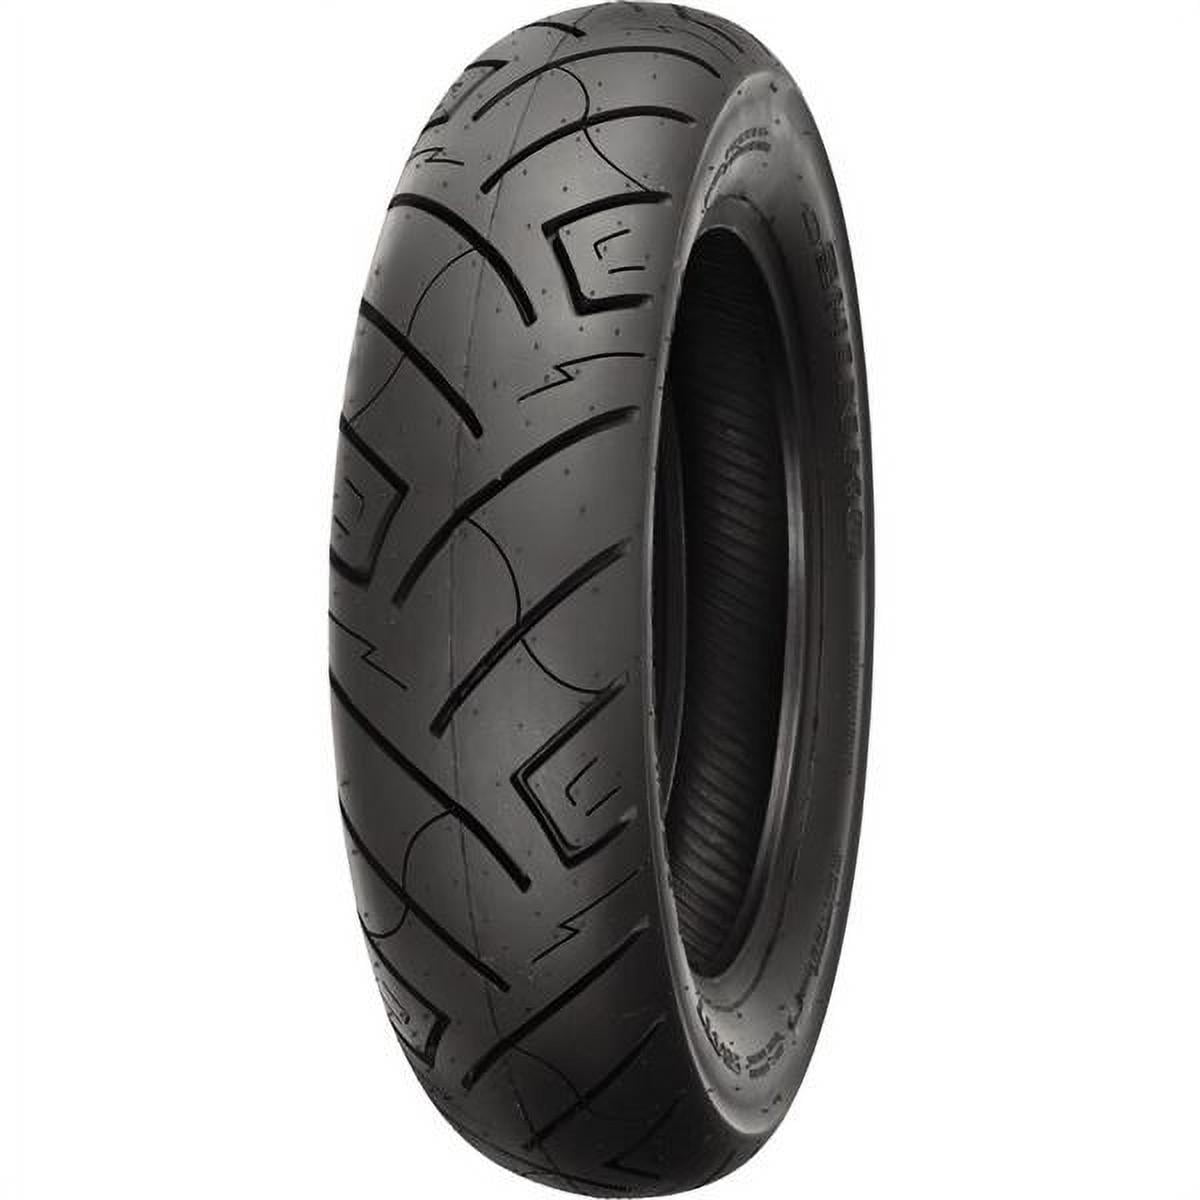 100/90-19 (61H) Shinko 777 H.D. Front Motorcycle Tire Reflective 